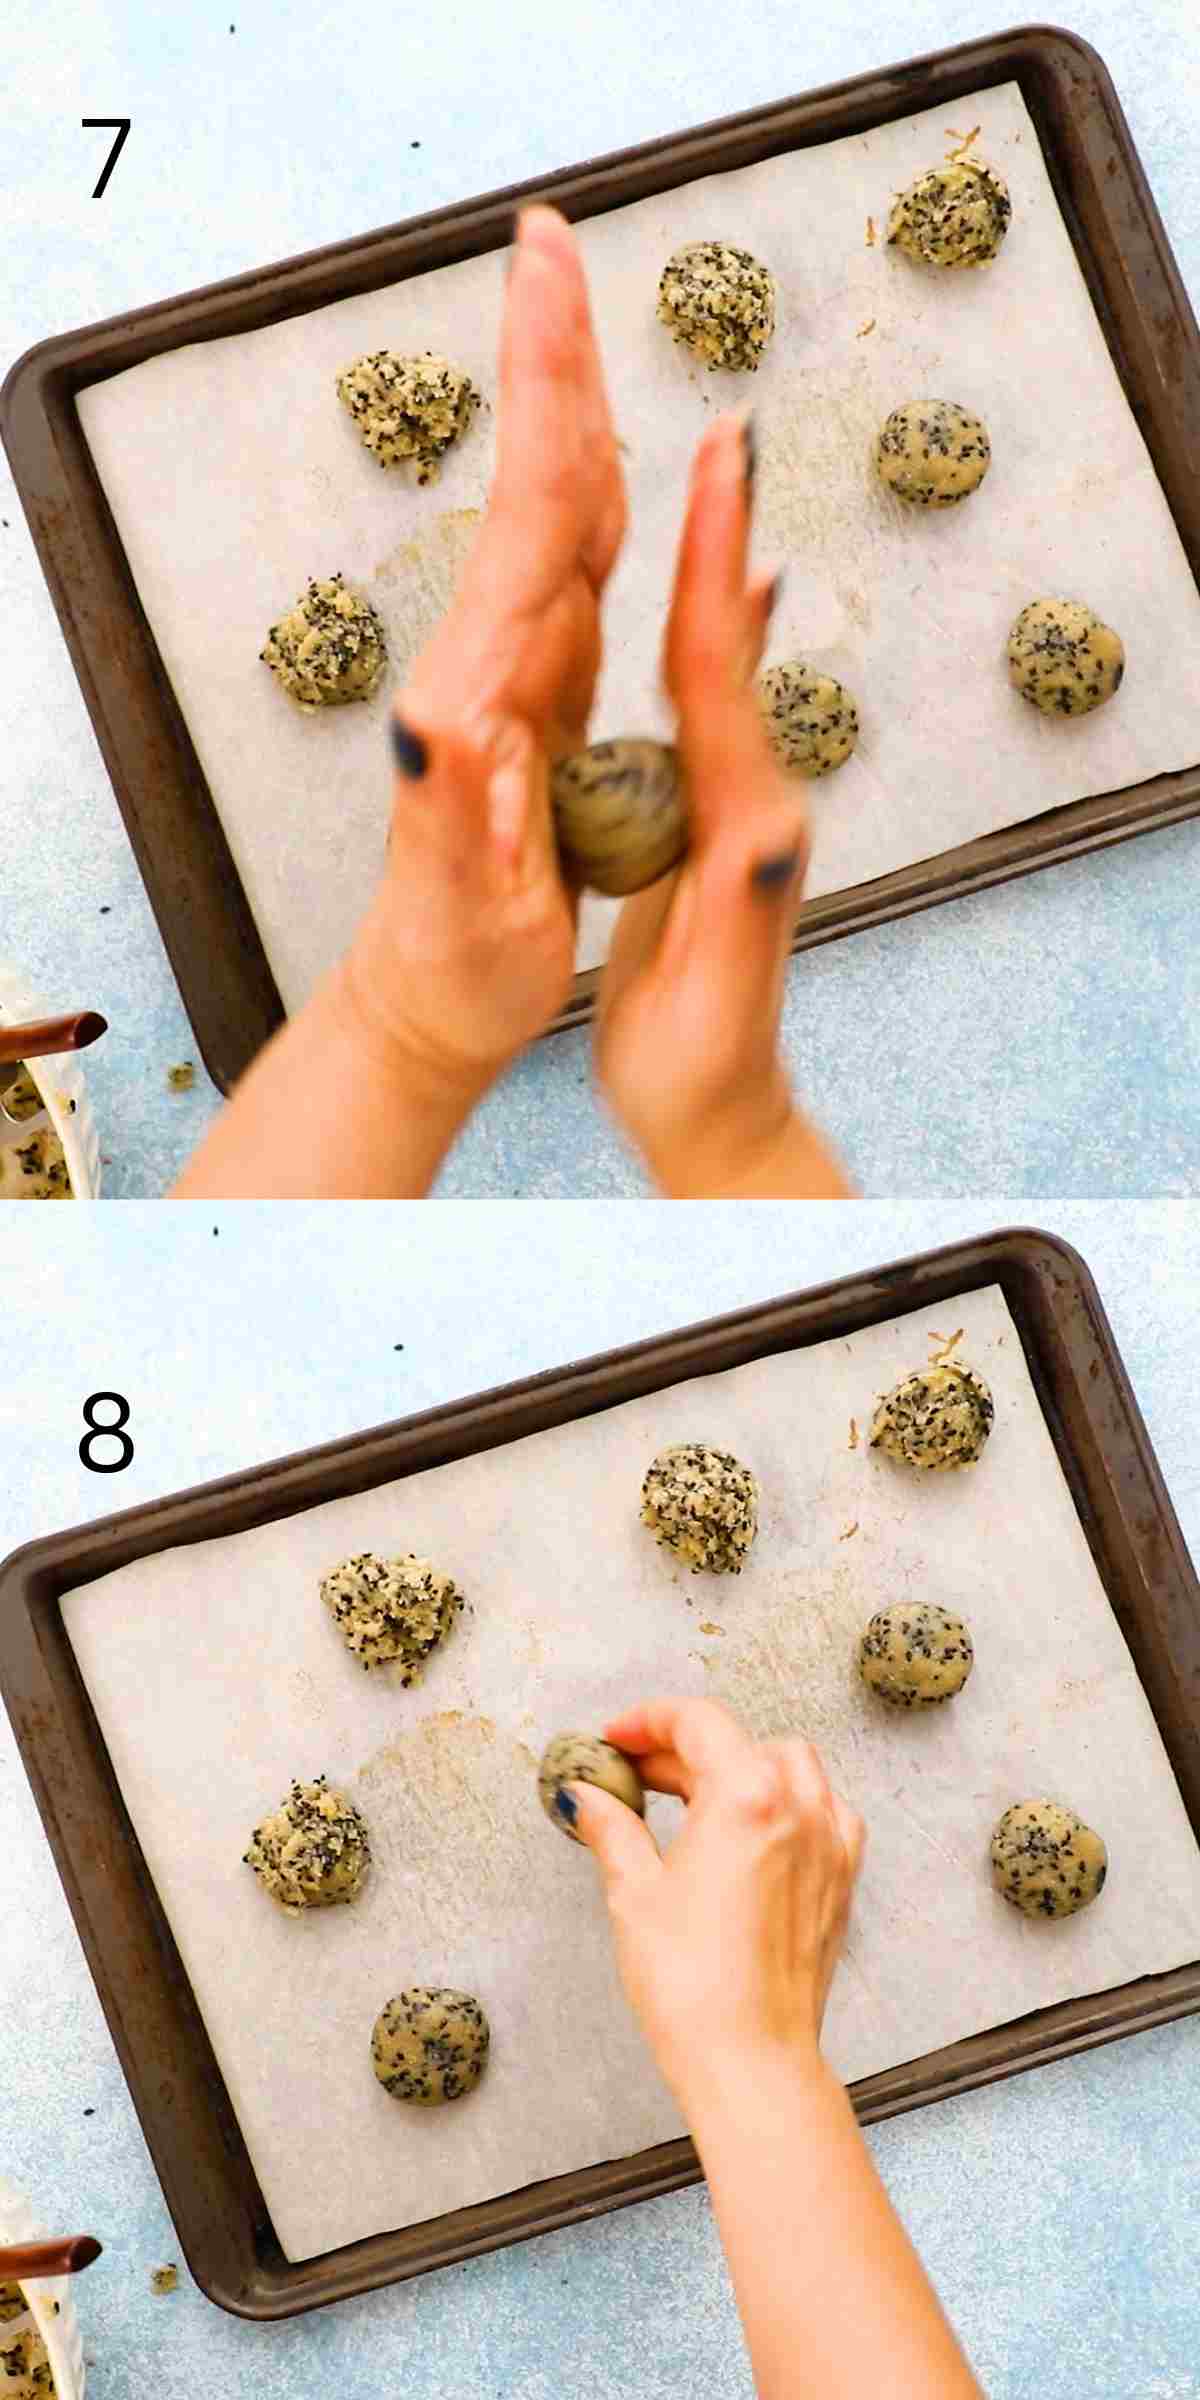 2 photo collage of rolling and shaping  cookie dough with hands.